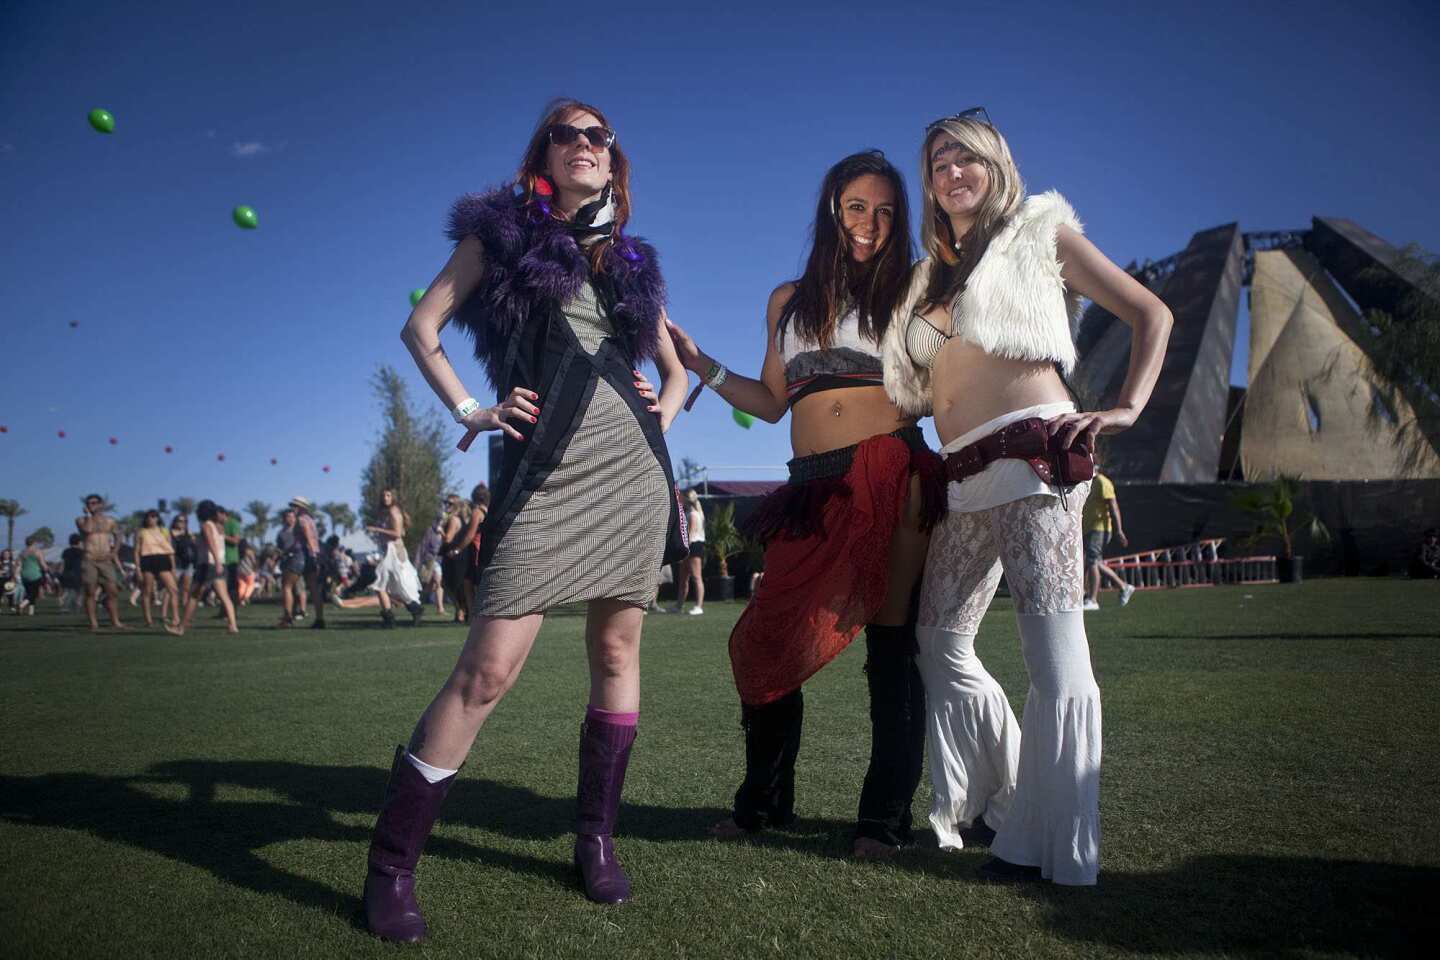 Lindsey Ackerman in purple fur and purple cowboy boots, left, Sarah Falatic and Chelsea Griggy pose together on the second day of the Coachella Music Festival.